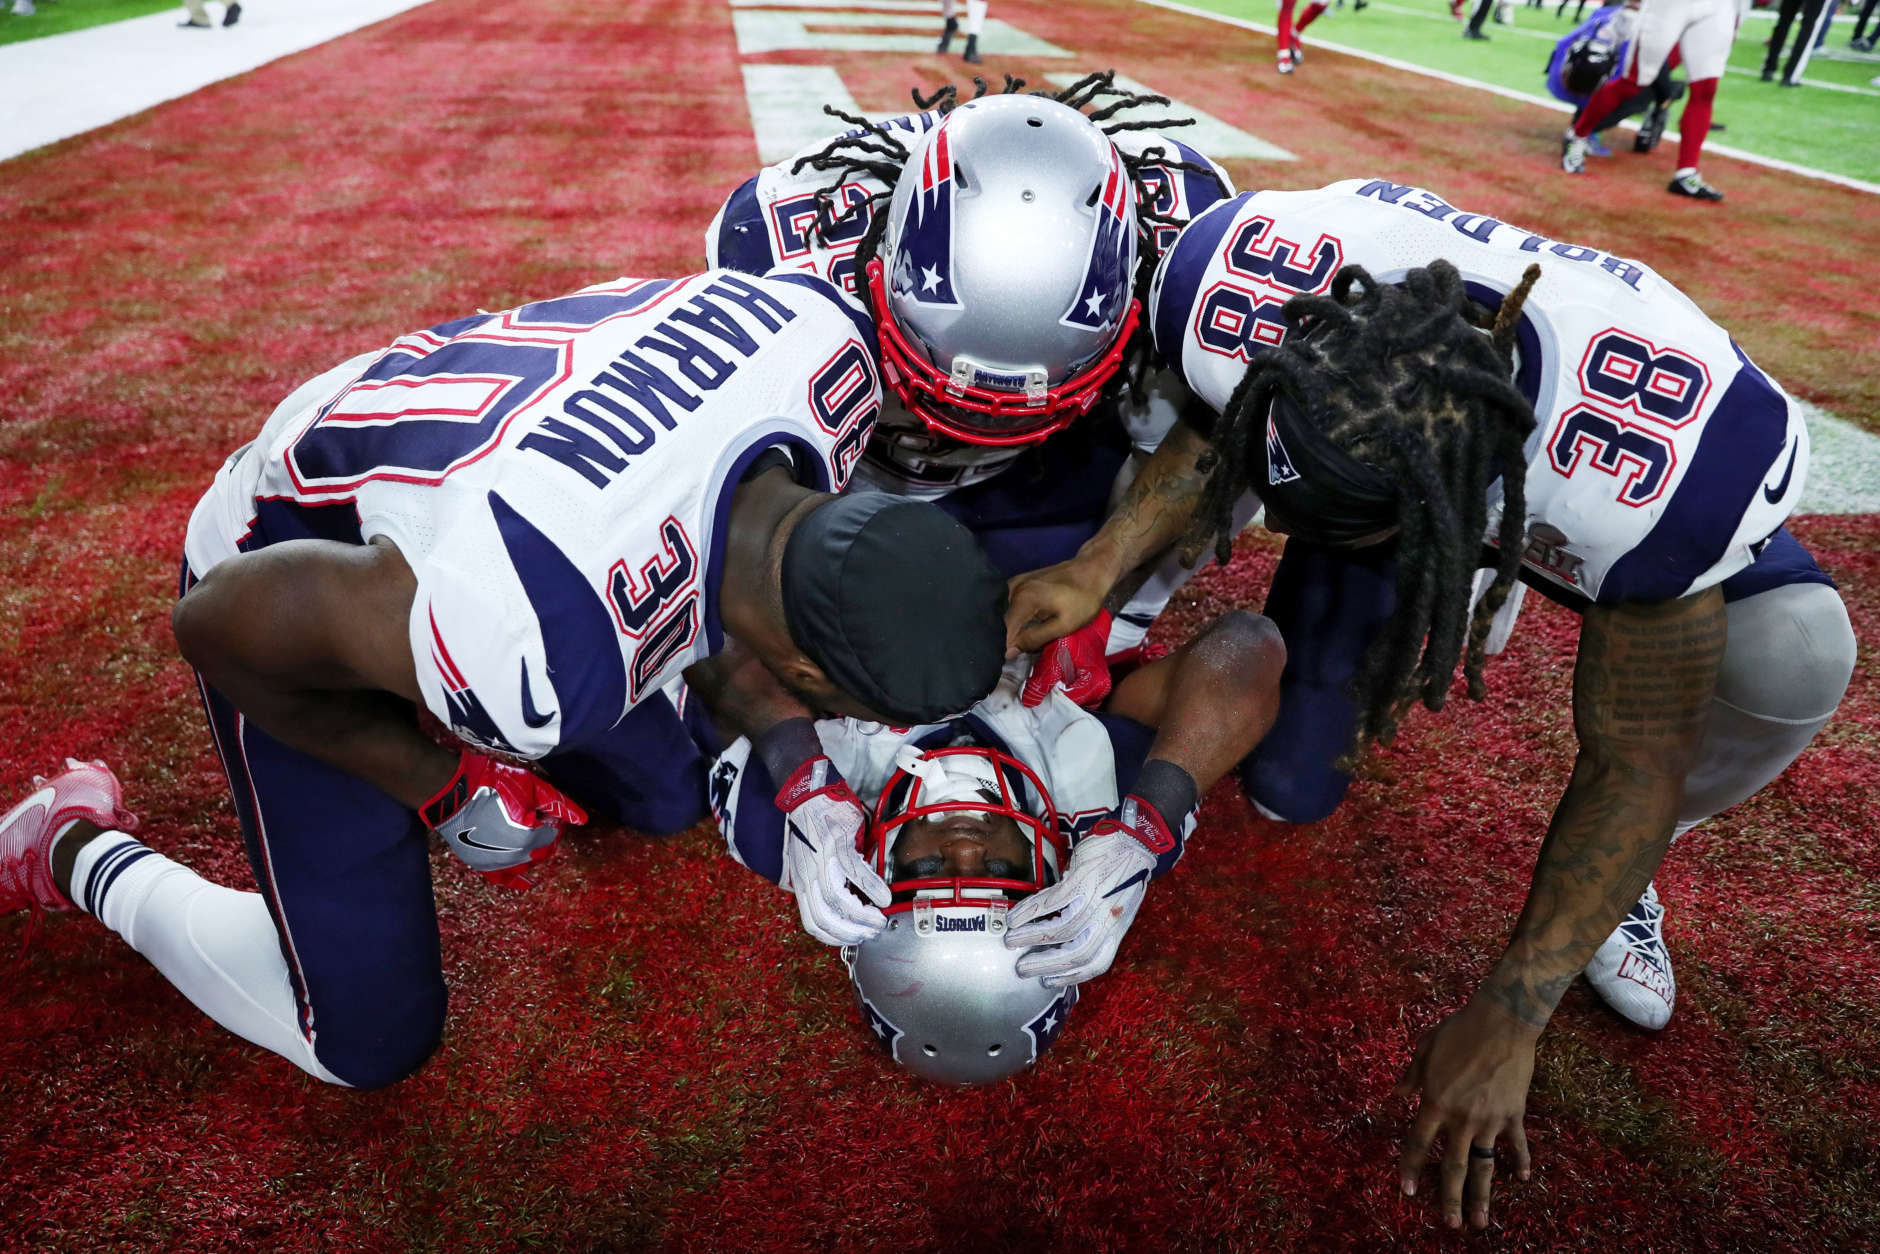 HOUSTON, TX - FEBRUARY 05:  James White #28 of the New England Patriots celebrates with teammates after defeating the Atlanta Falcons 34-28 in overtime to win Super Bowl 51 at NRG Stadium on February 5, 2017 in Houston, Texas.  (Photo by Tom Pennington/Getty Images)